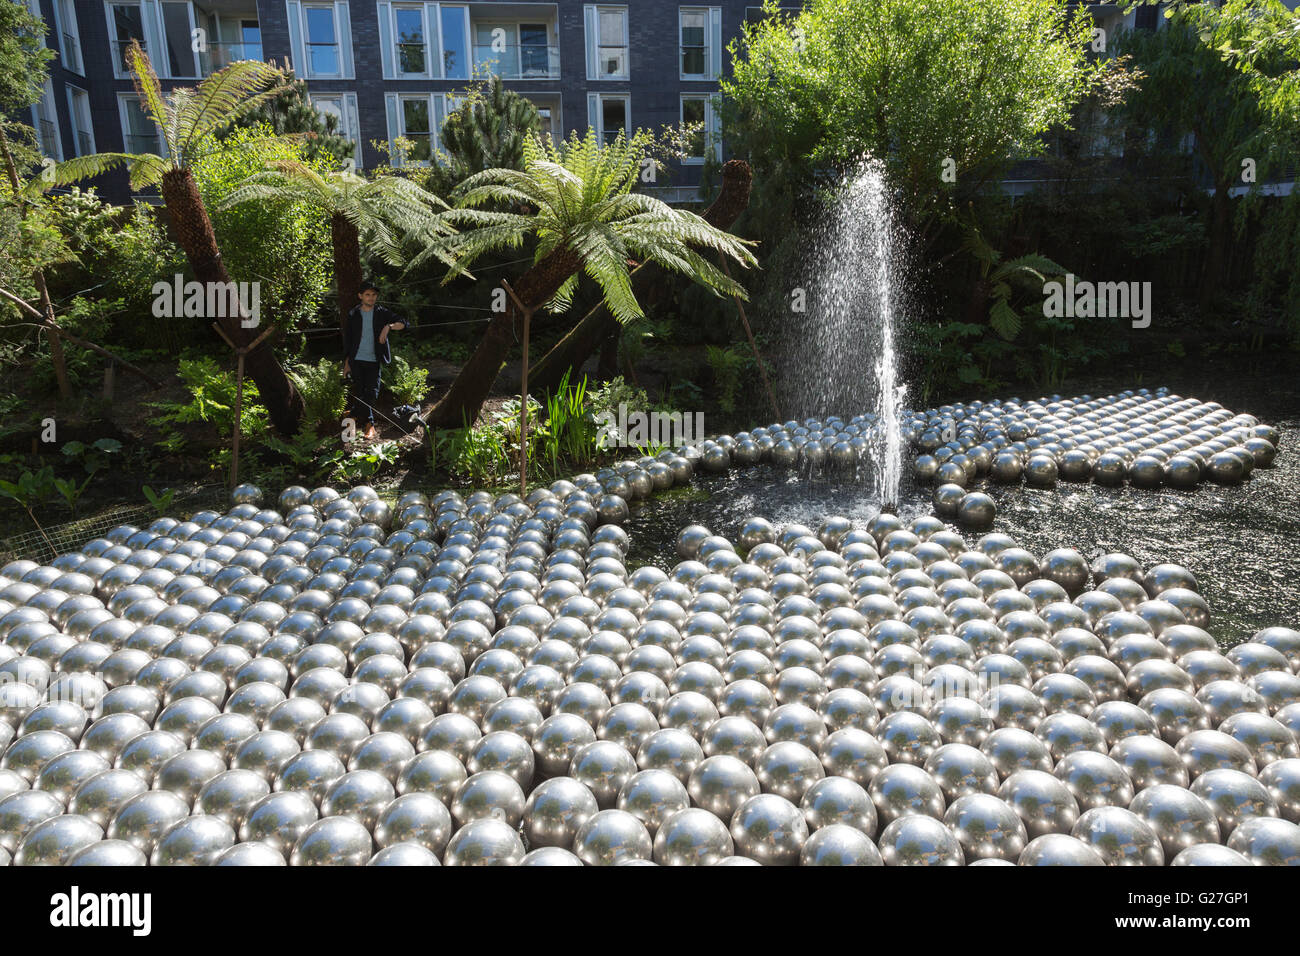 London, UK. 24 May 2016. Narcissus Garden, 1966. A new exhibition by Japanese artist Yayoi Kusama opens at all three locations of Victoria Miro Gallery in London and runs from 25 May to 30 July 2016. Stock Photo